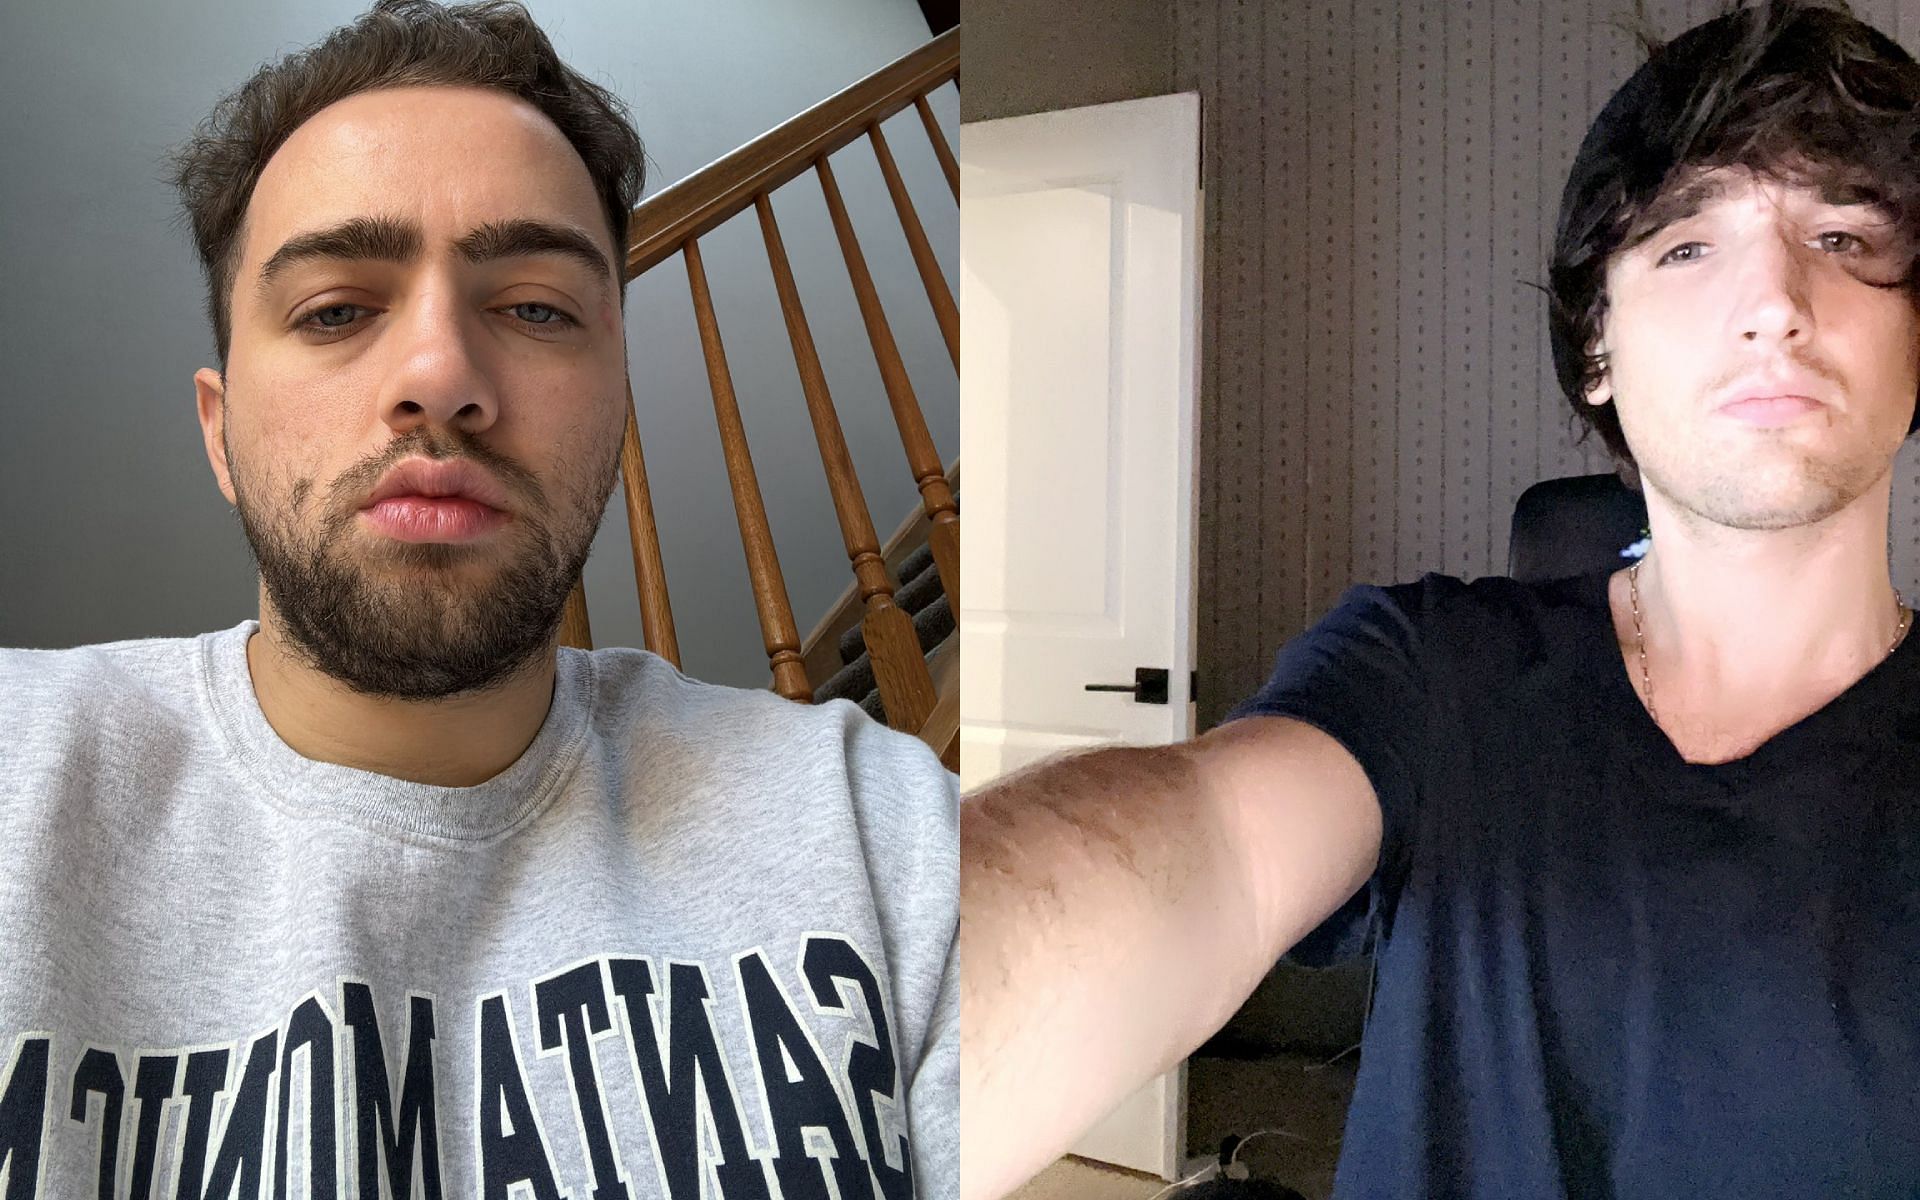 Mitch Jones doubles down on allegations against Mizkif, claims he did not &quot;make any aggressive contact&quot; (Image via @MitchJonez and @REALMizkif/X)